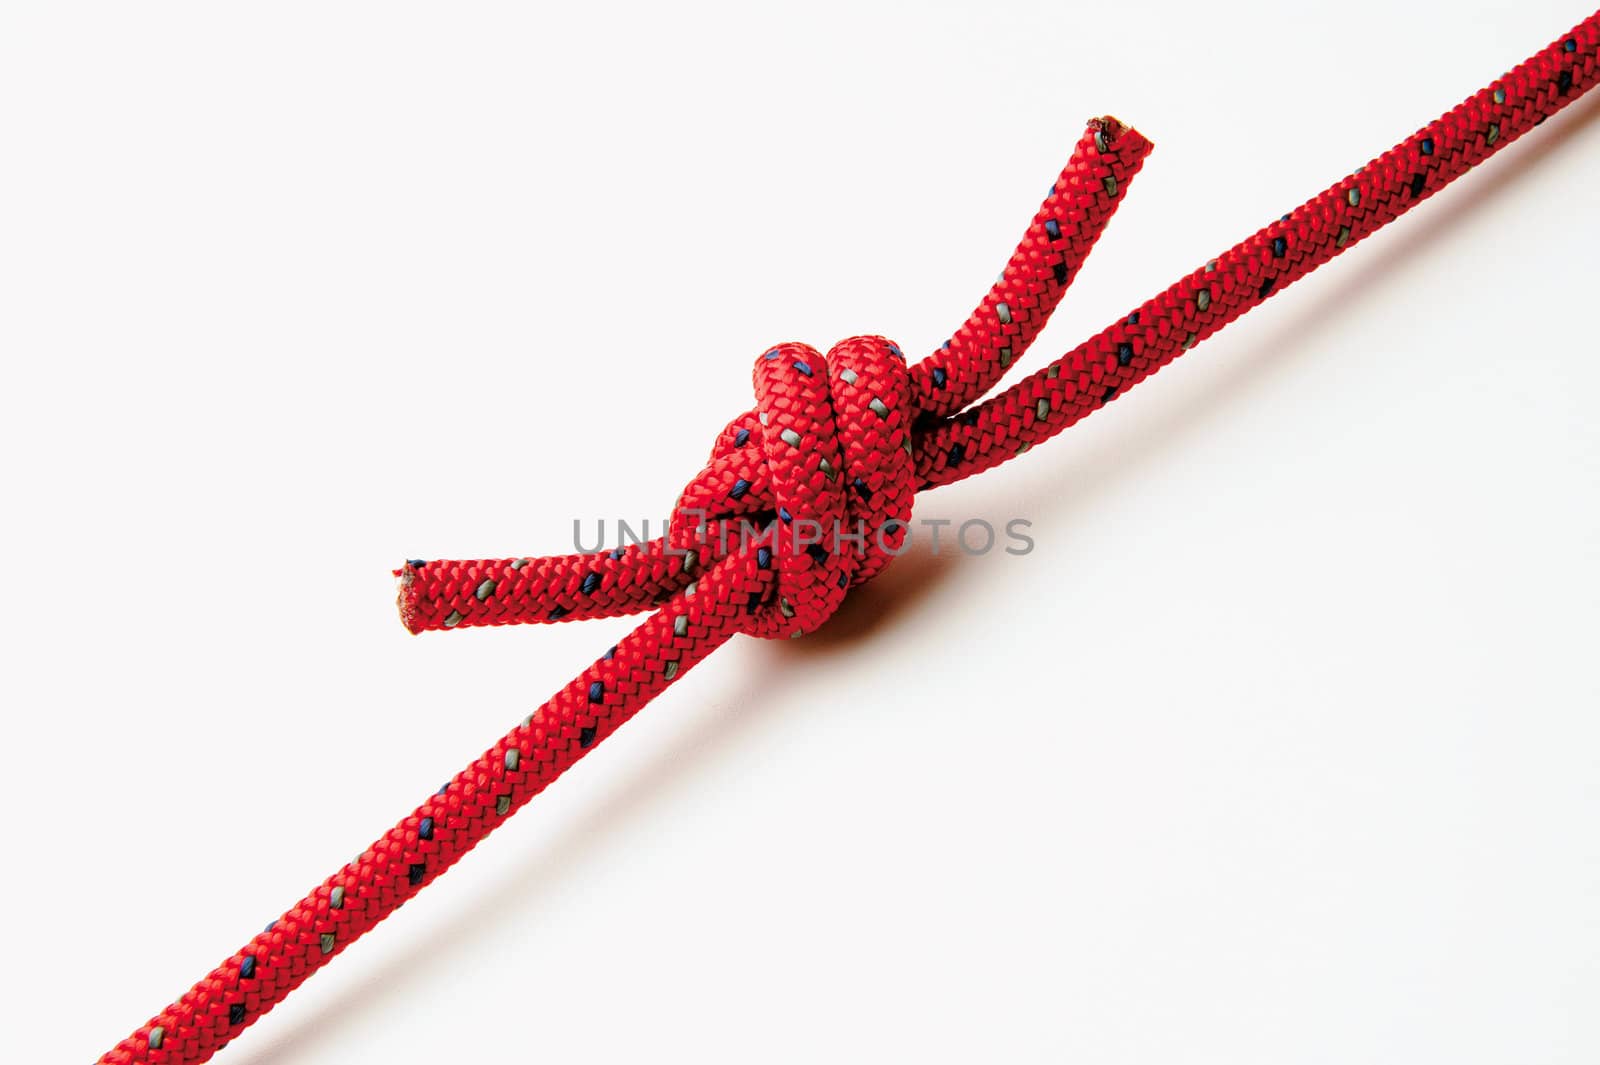 Knot on red rope by hanusst